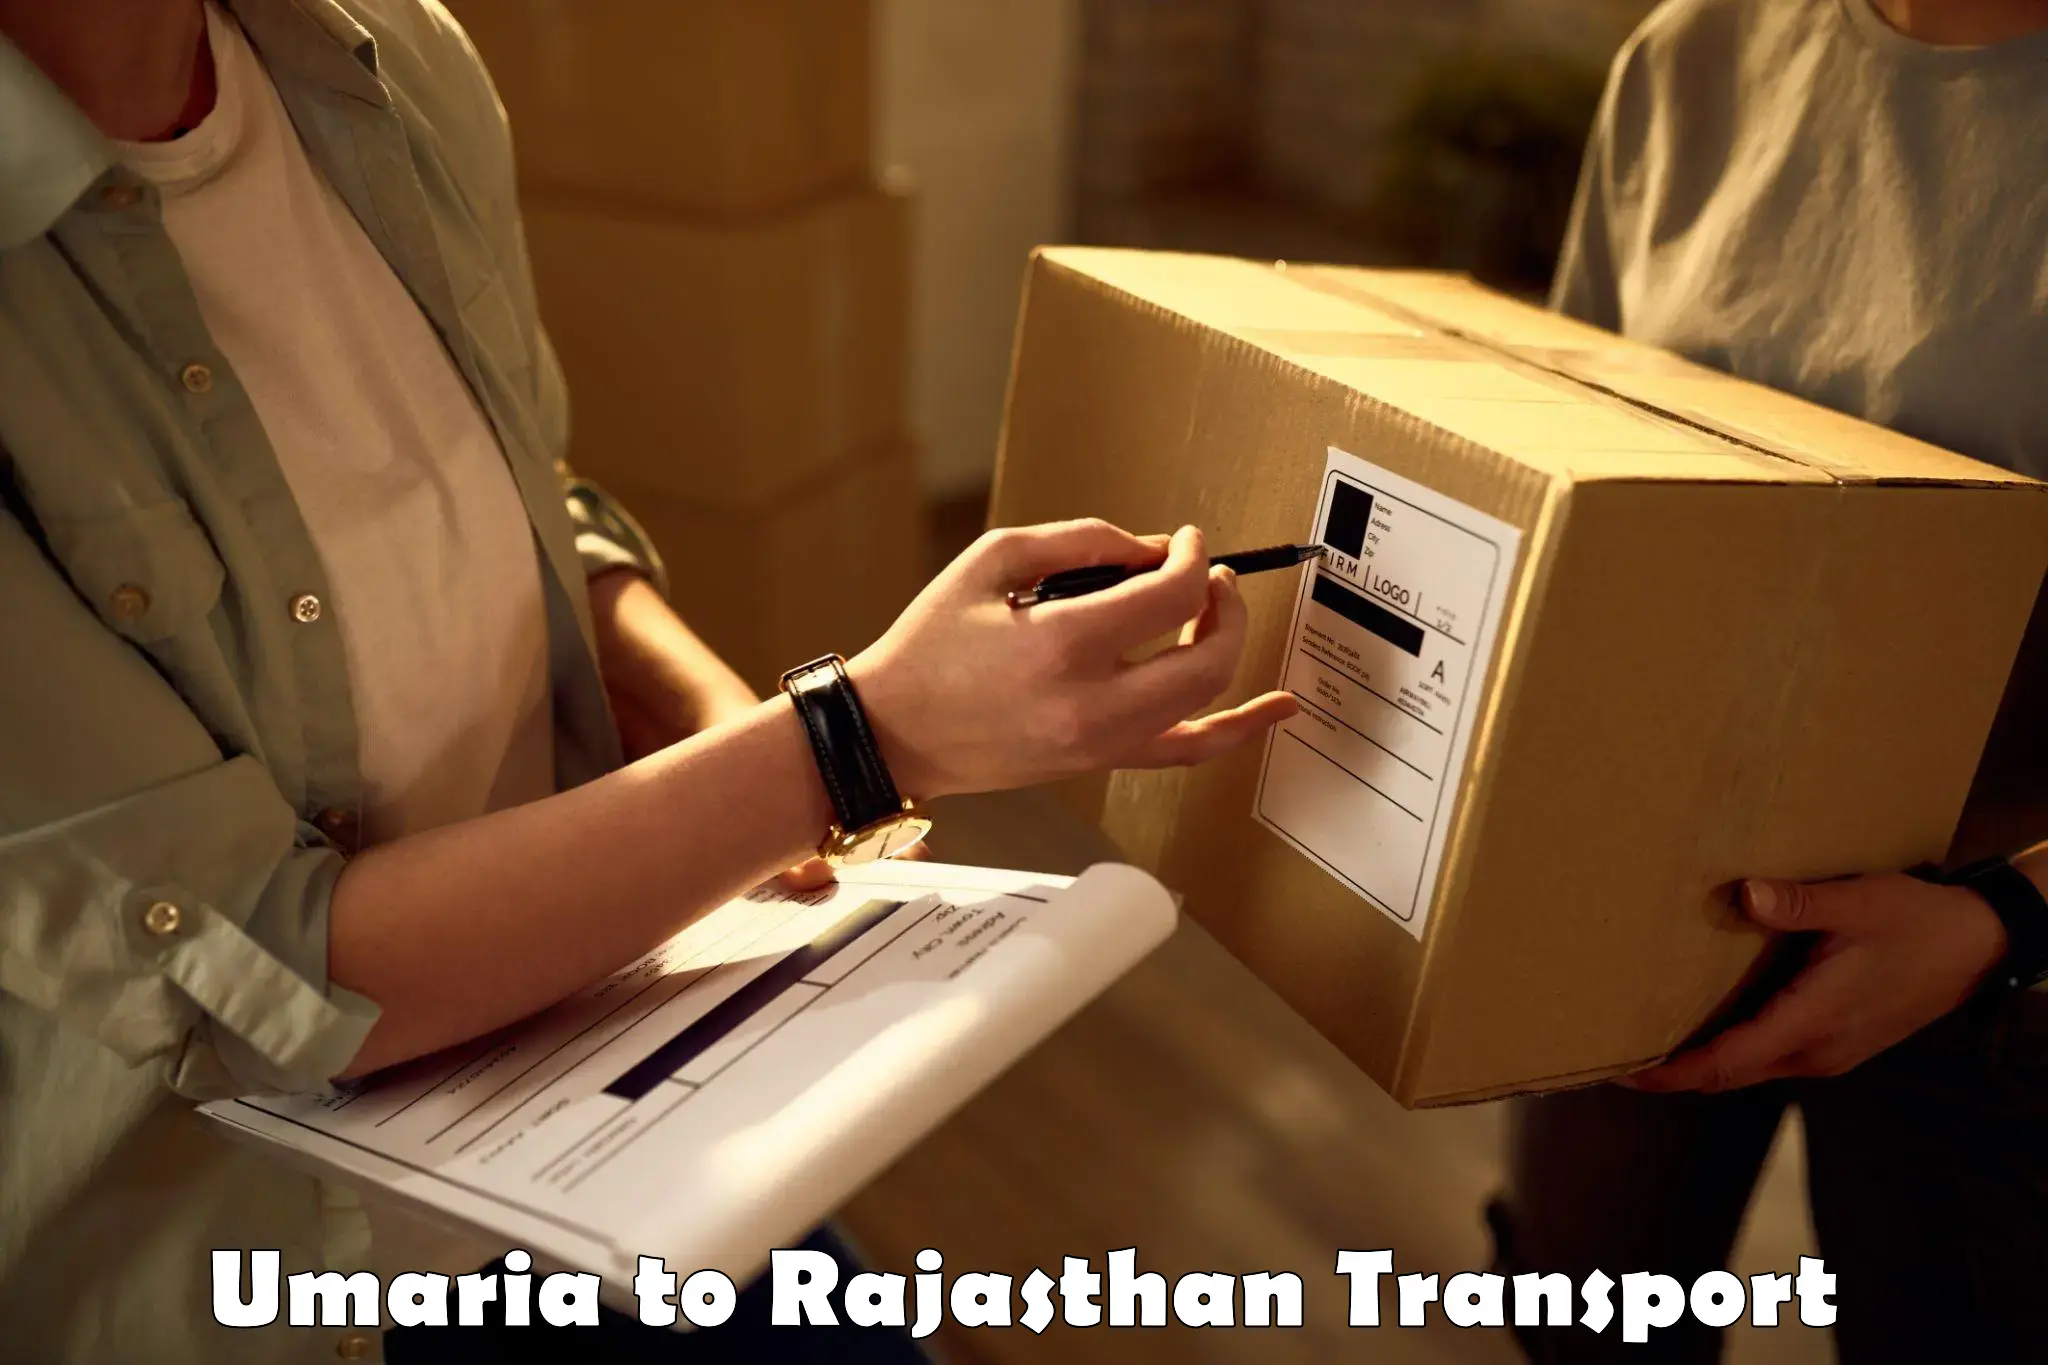 Truck transport companies in India Umaria to Mathania